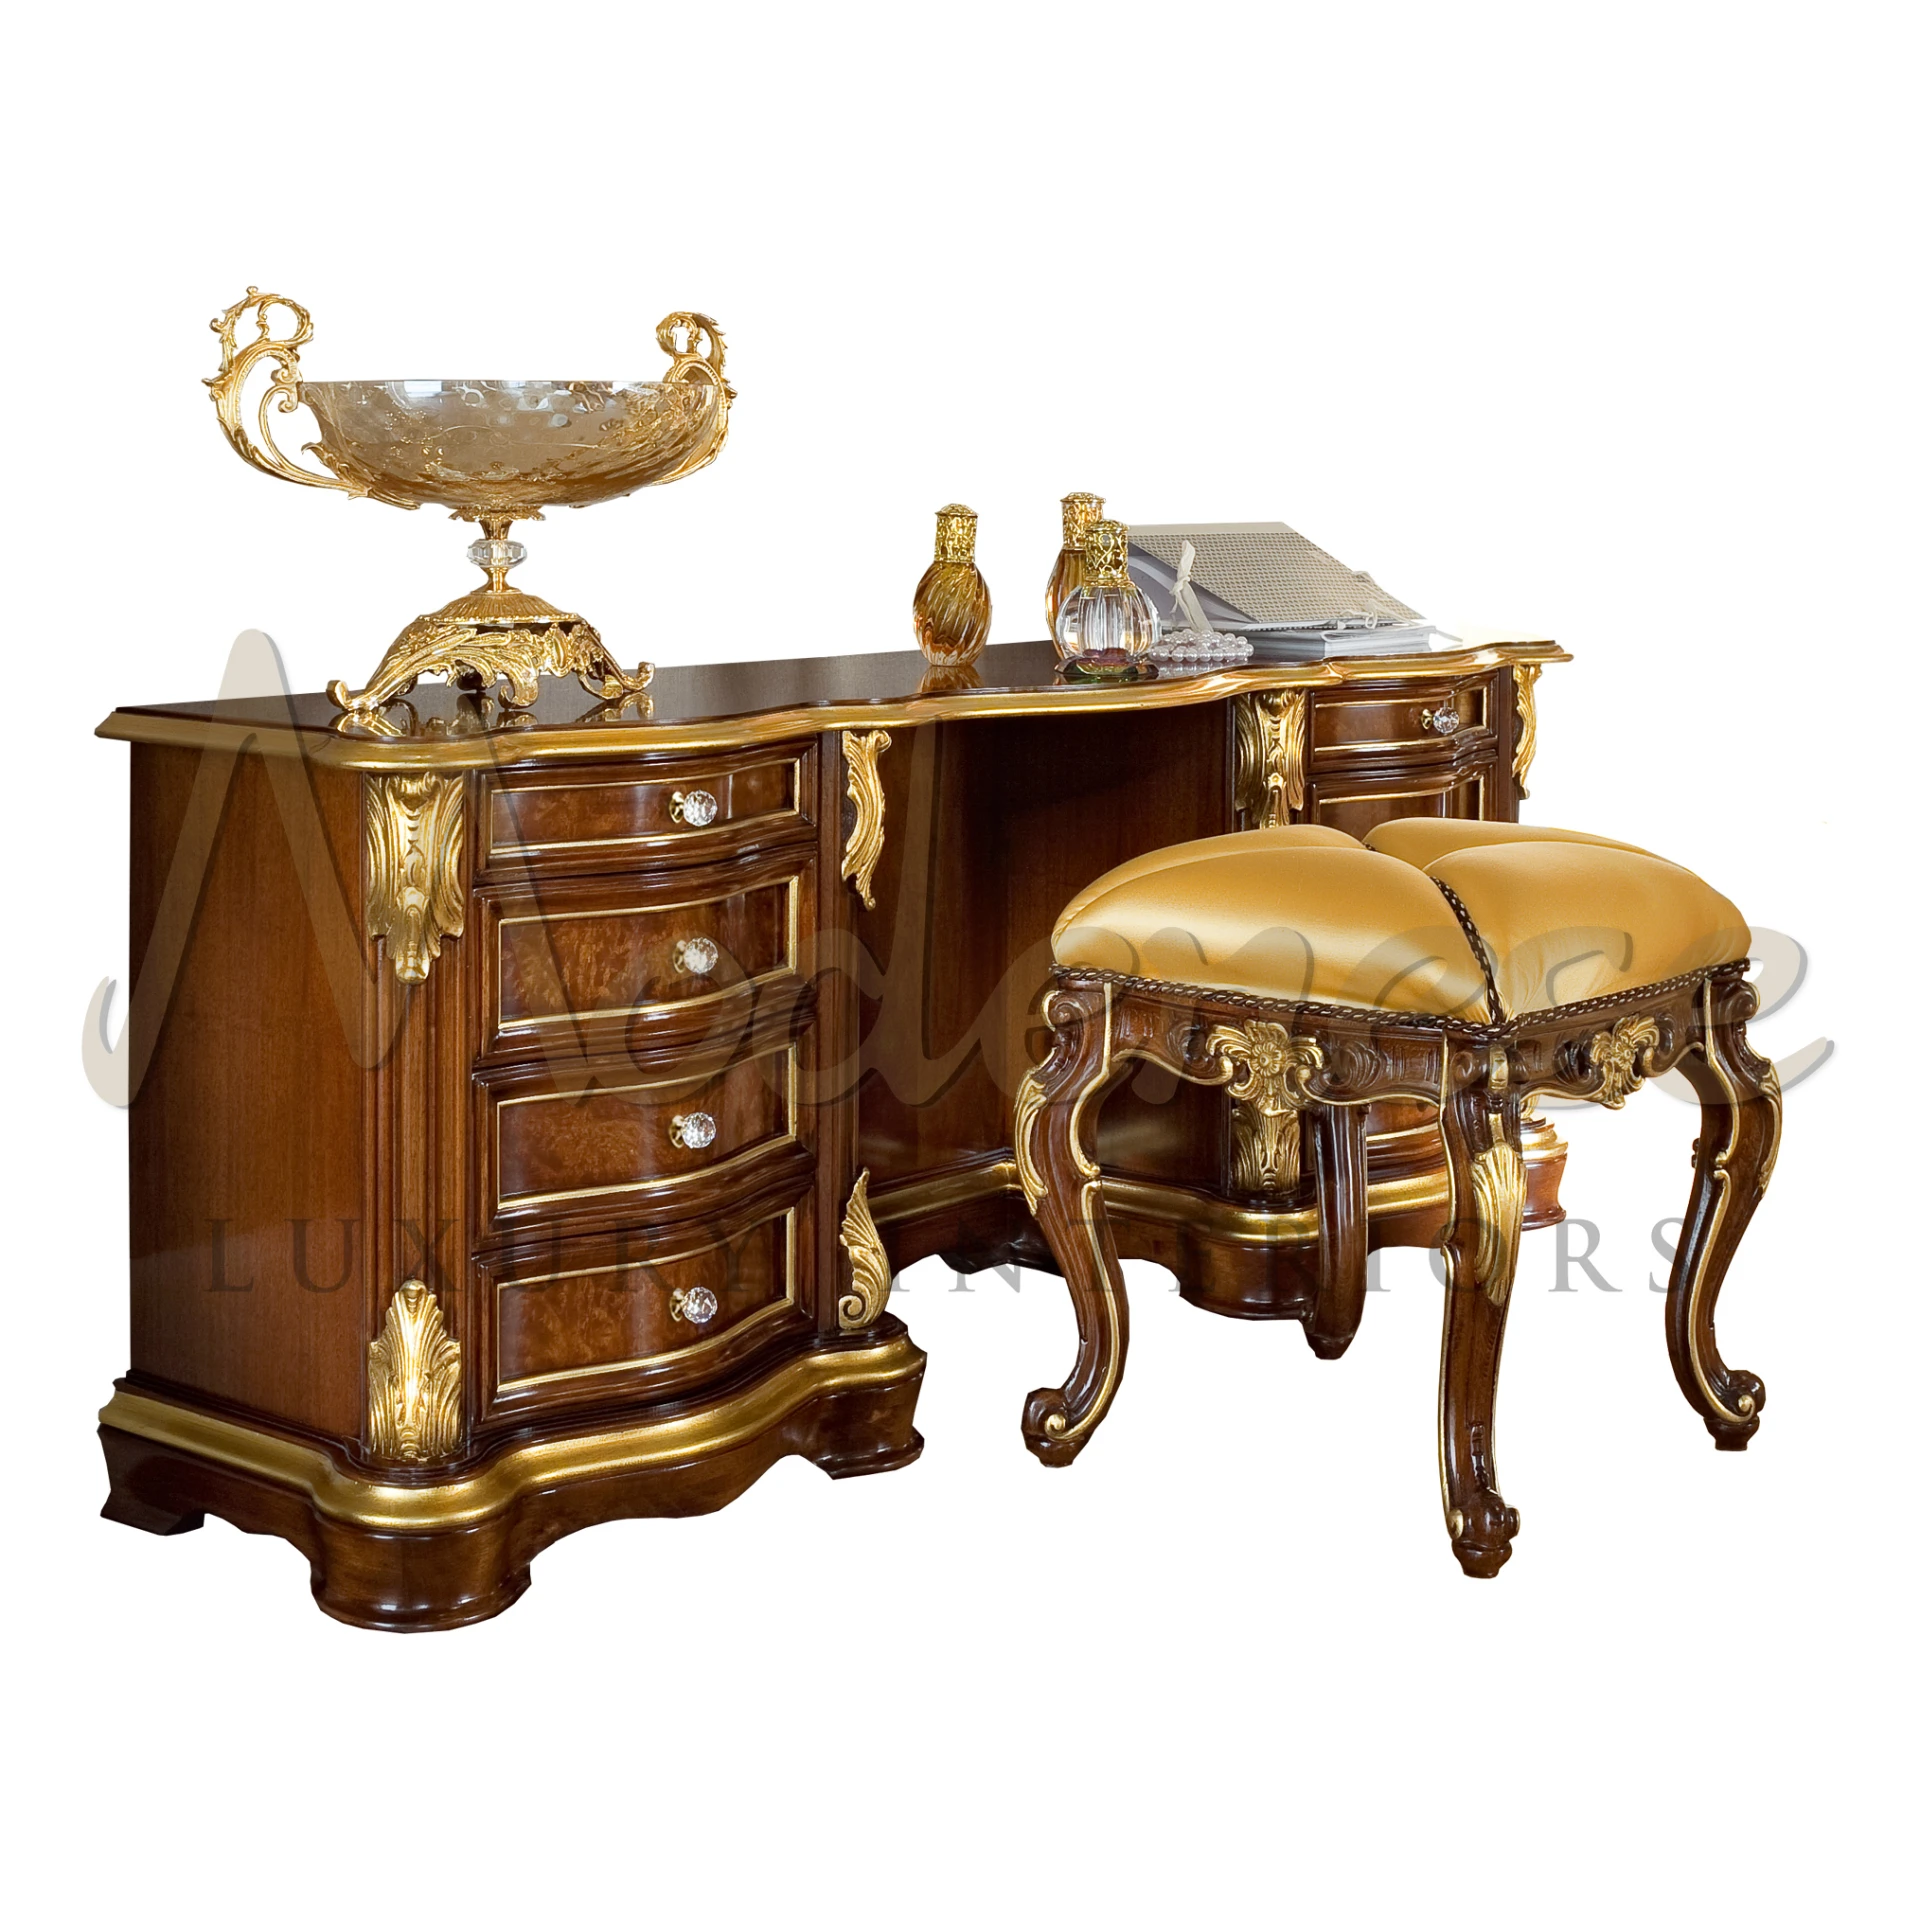 Elegant mahogany dressing table with gold leaf accents, multiple drawers, and a matching stool with a golden cushion, adorned with a large decorative gold bowl and perfume bottles.